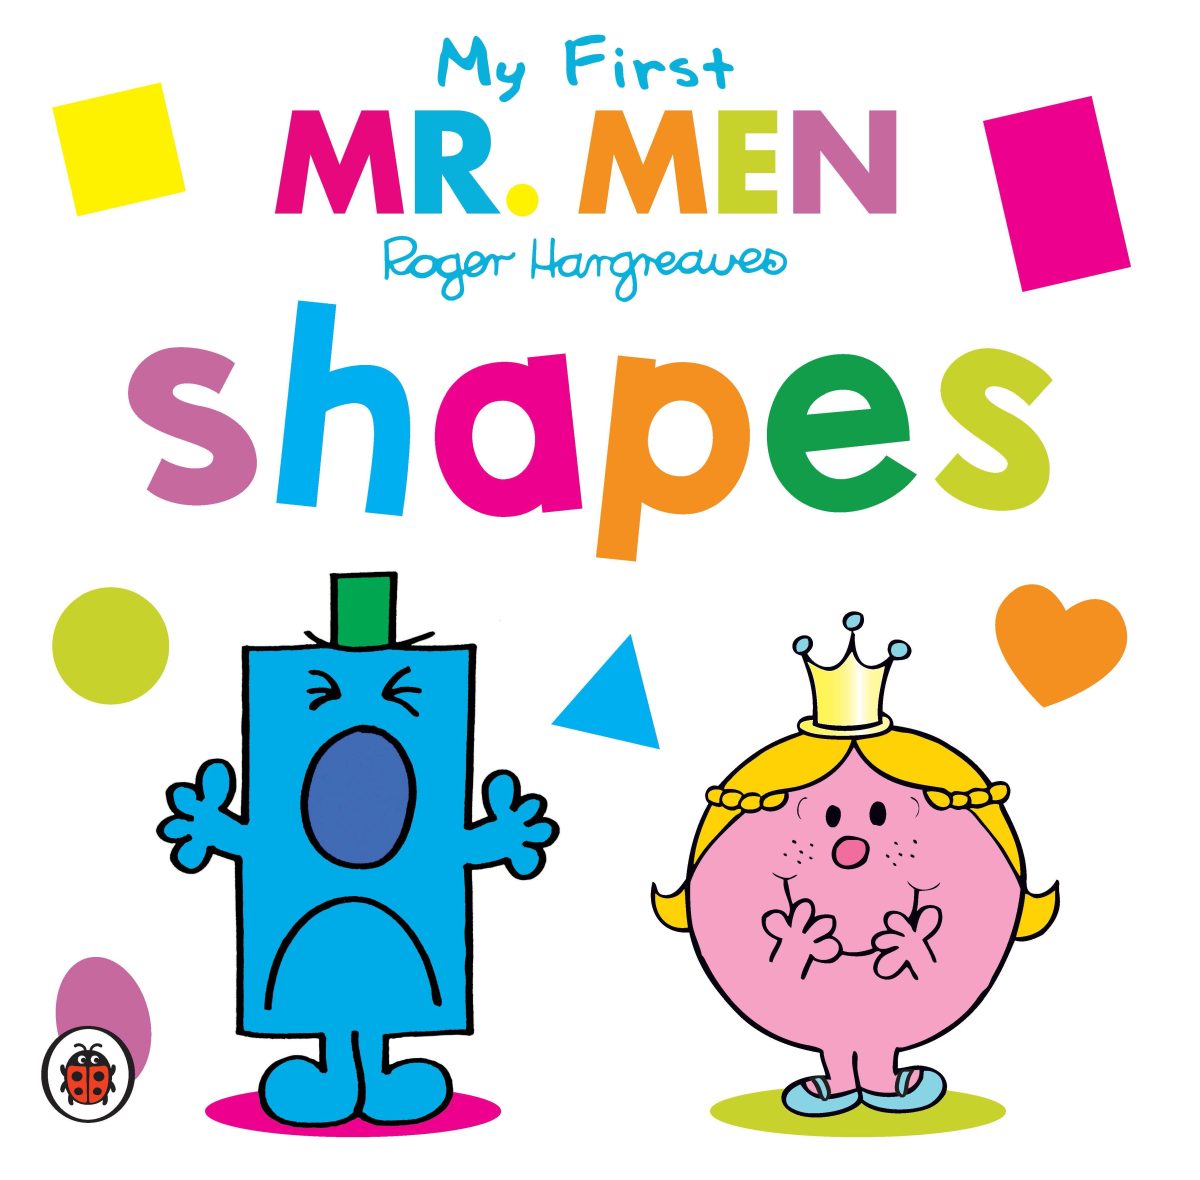 Mr Men: My First Shapes (Board Book)